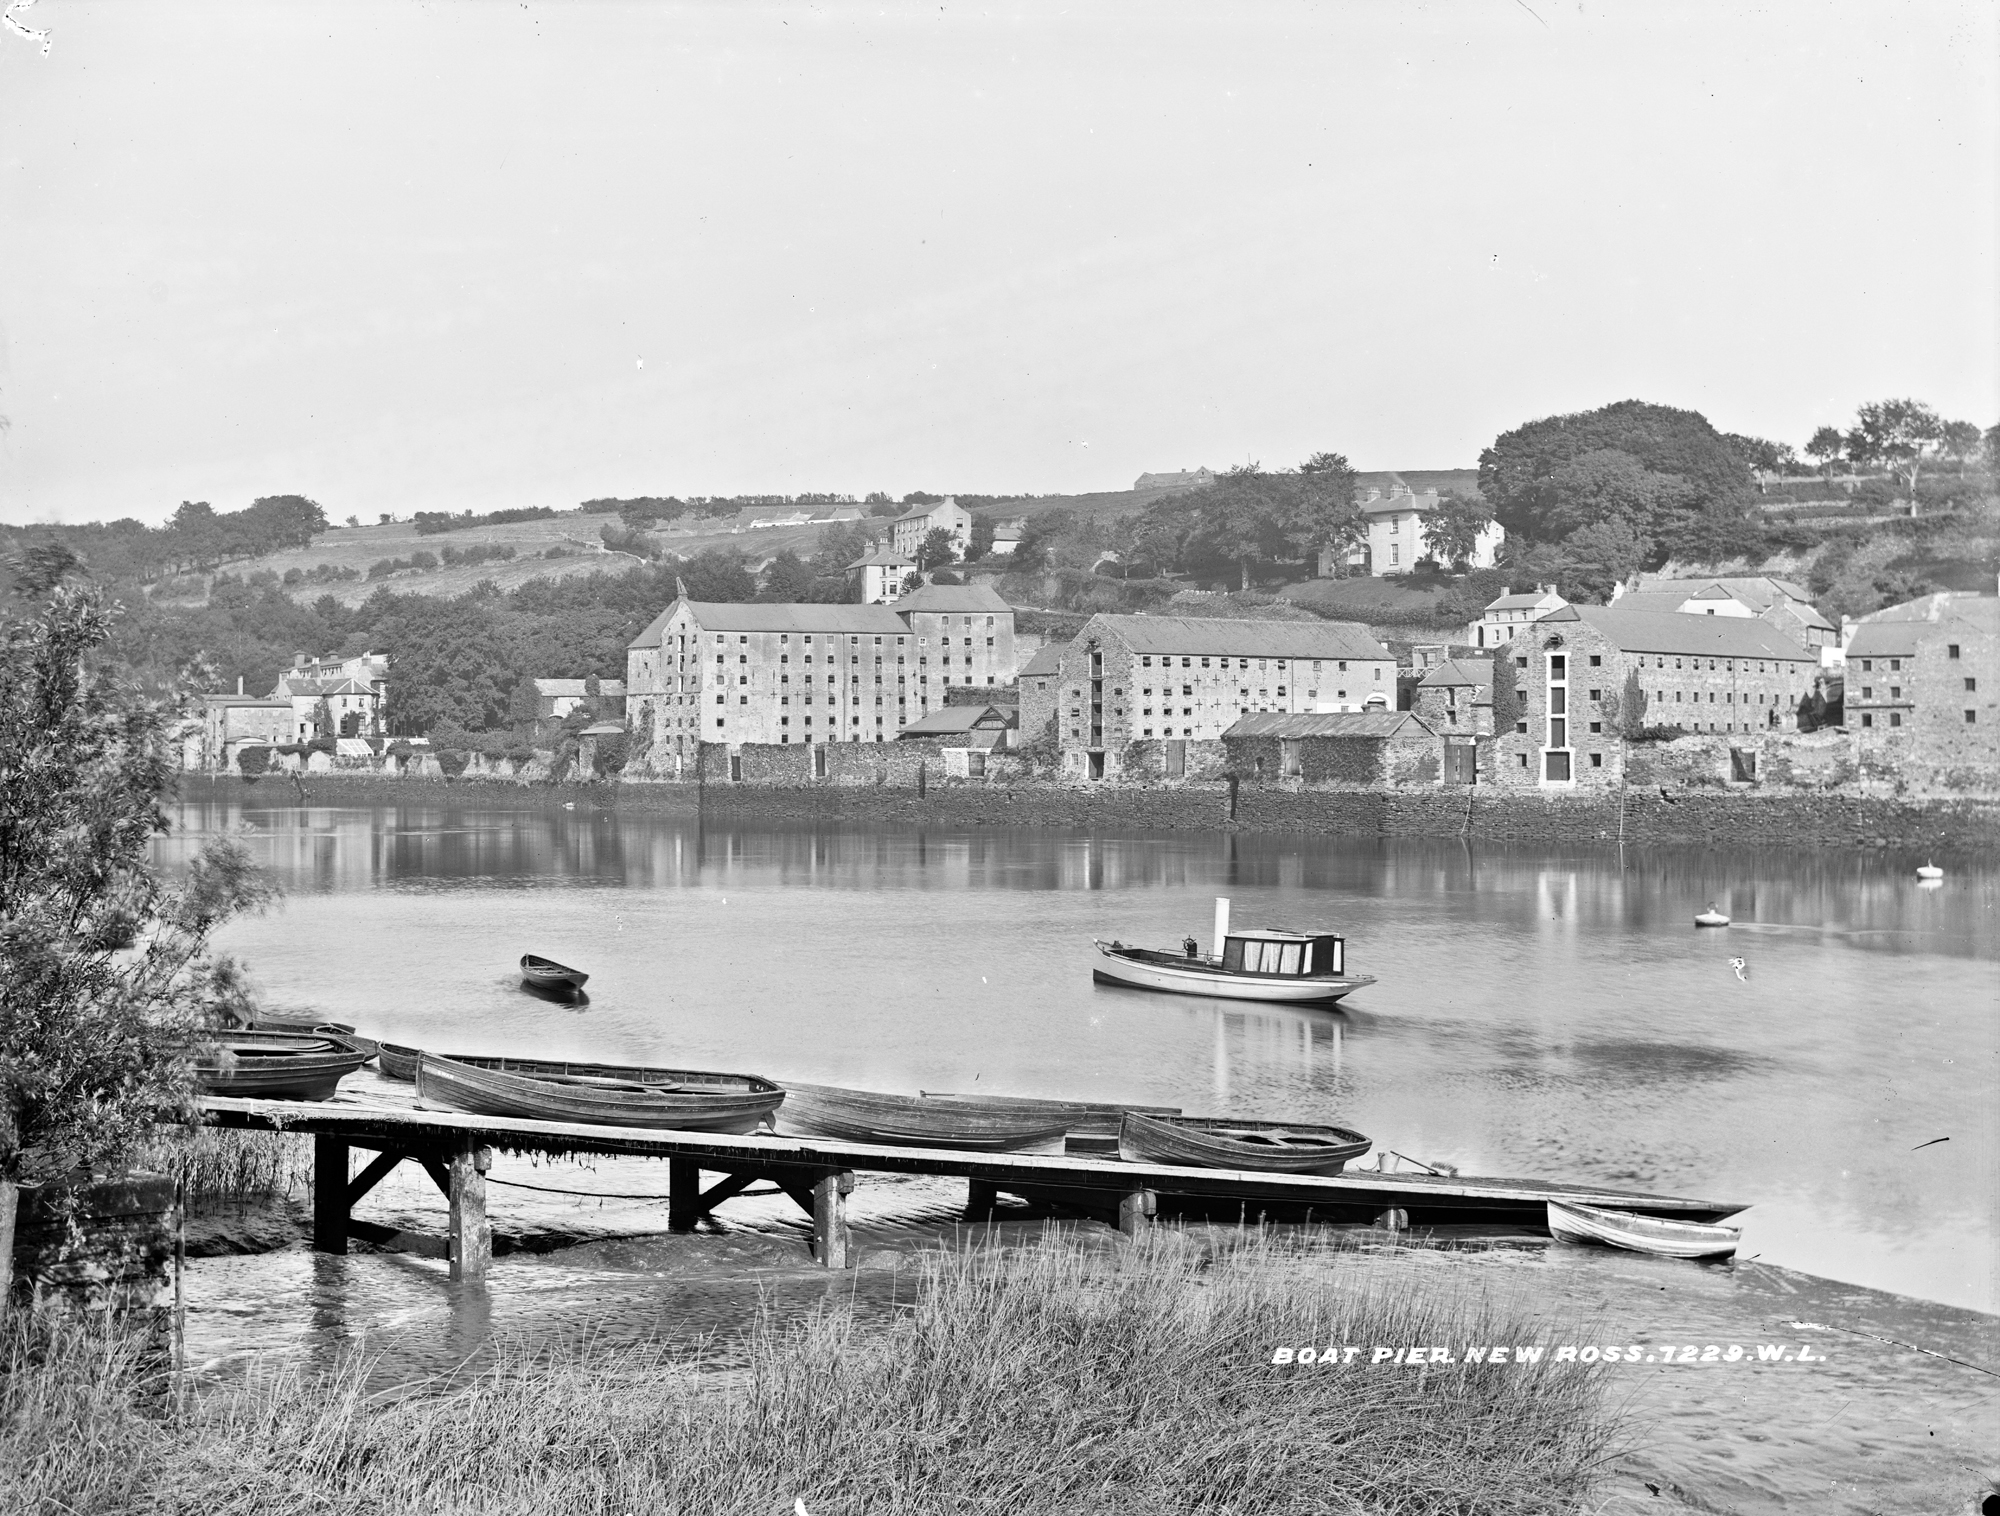 Mud, boats and quays - the Barrow at New Ross.